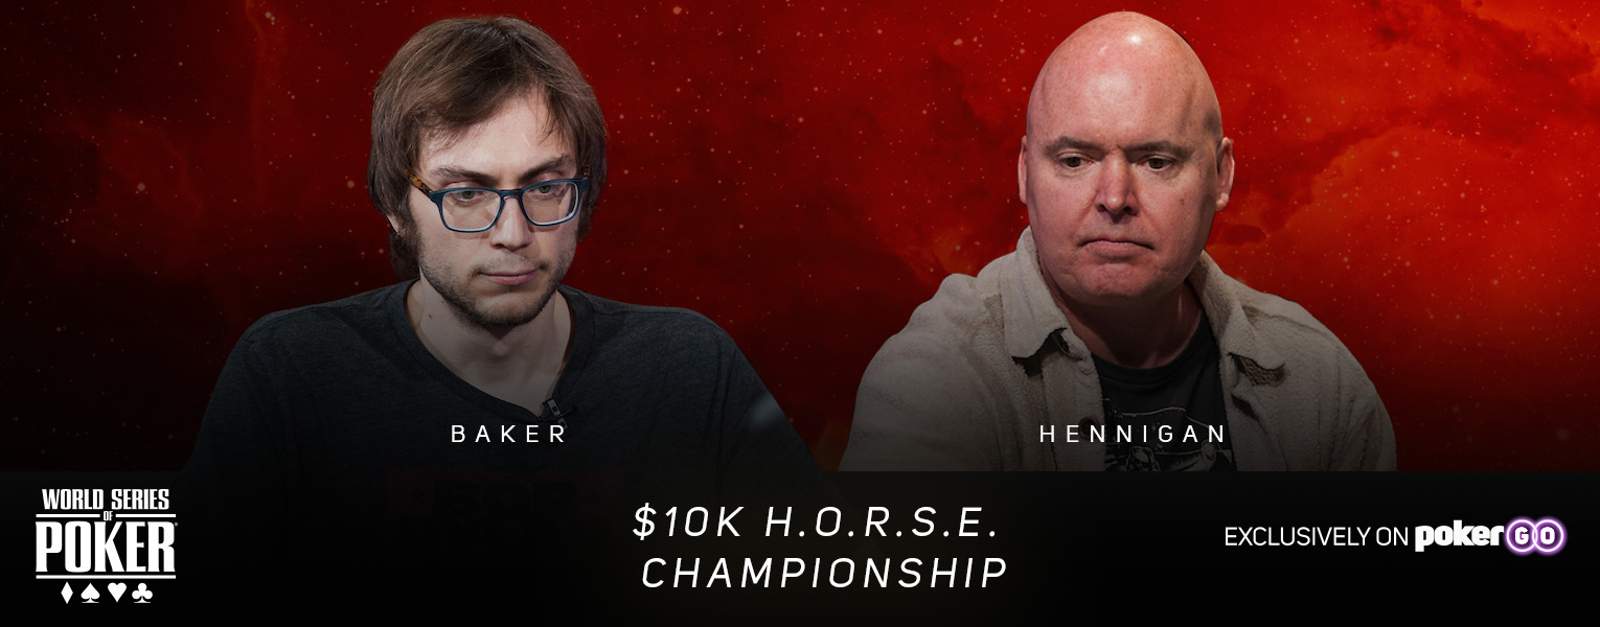 Hennigan & Baker Play for H.O.R.S.E. Championship Title Live on PokerGO